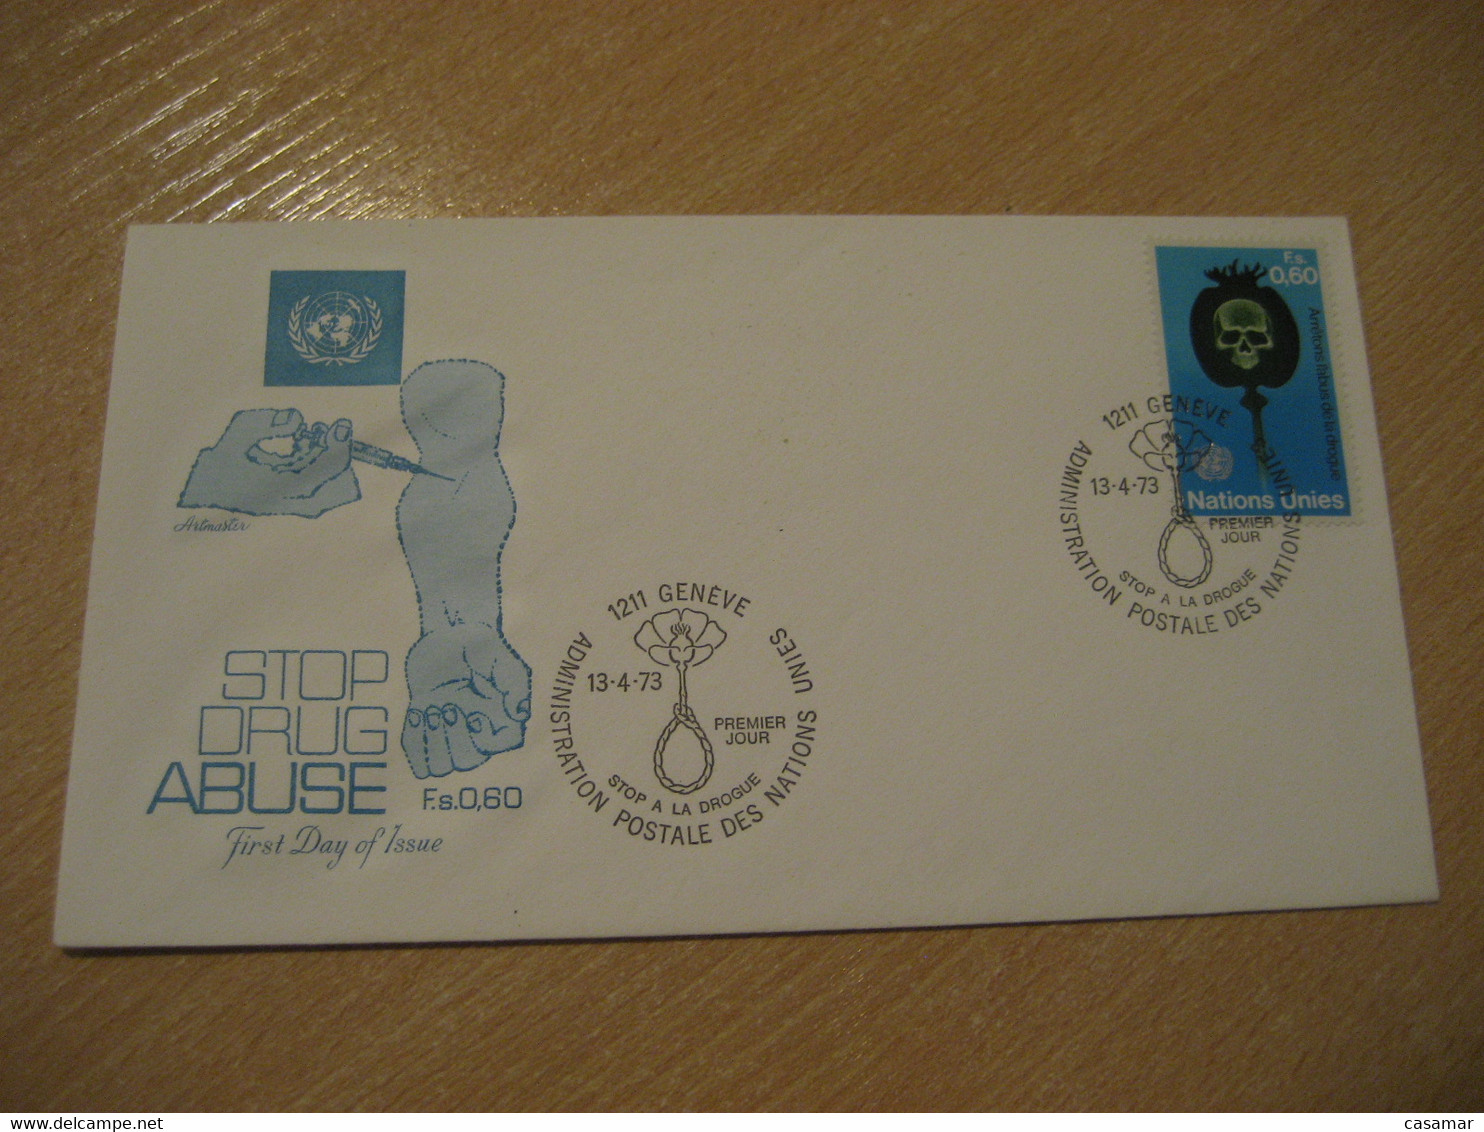 GENEVE 1973 Stop Drogue Drug Abuse Narcotic Drugs Chemical FDC Health Sante Cancel Cover UNITED NATIONS Switzerland - Droga